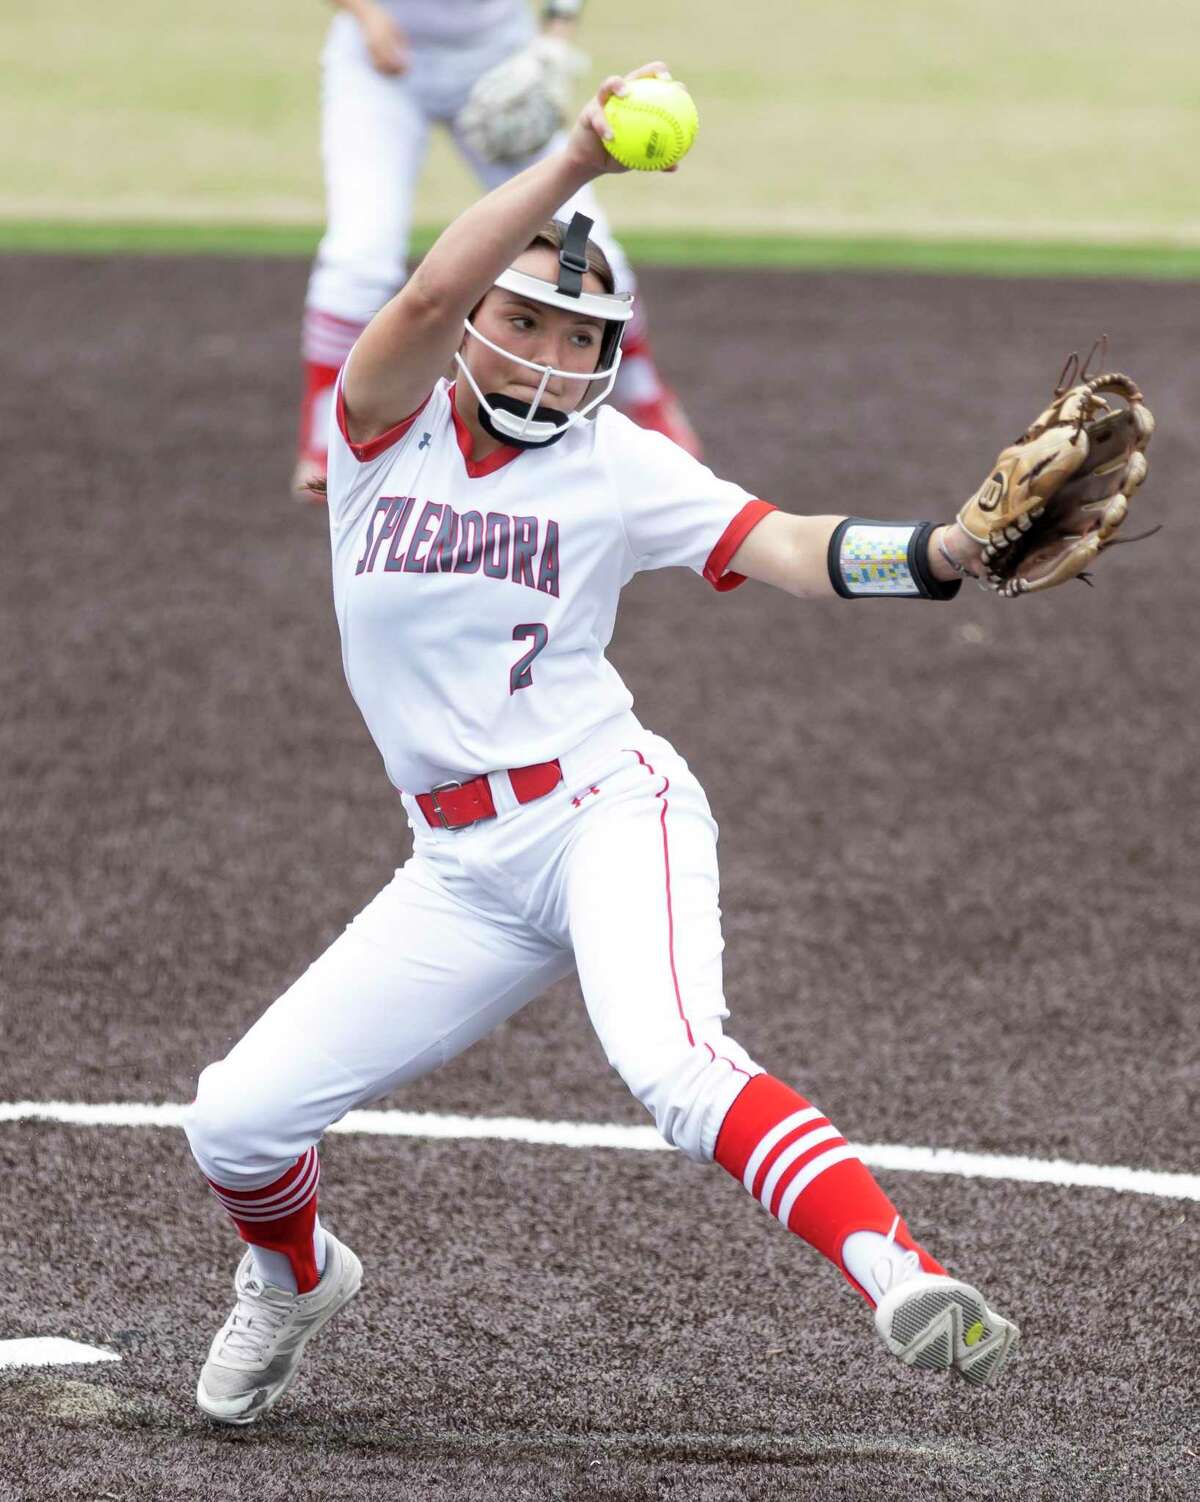 Splendora pitcher Brooke Martin (2) throws during the fourth inning of a District 21-4A softball game against Huffman-Hargrave at Splendora High School, Tuesday, March 16, 2021, in Splendora